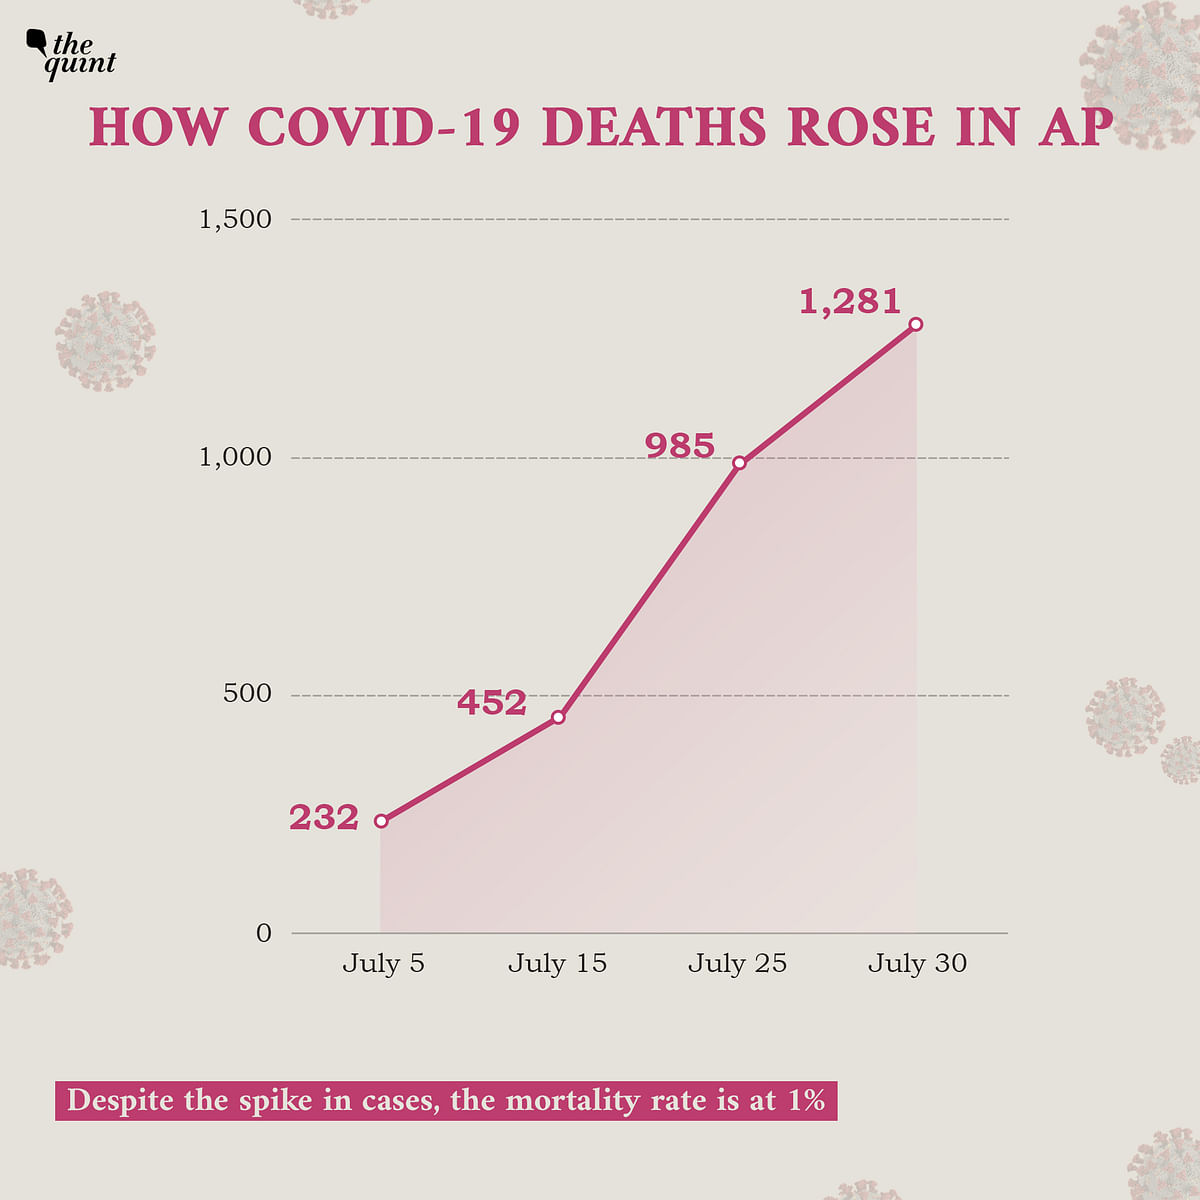 Andhra Pradesh reported more than 1 lakh COVID-19 cases in July. 